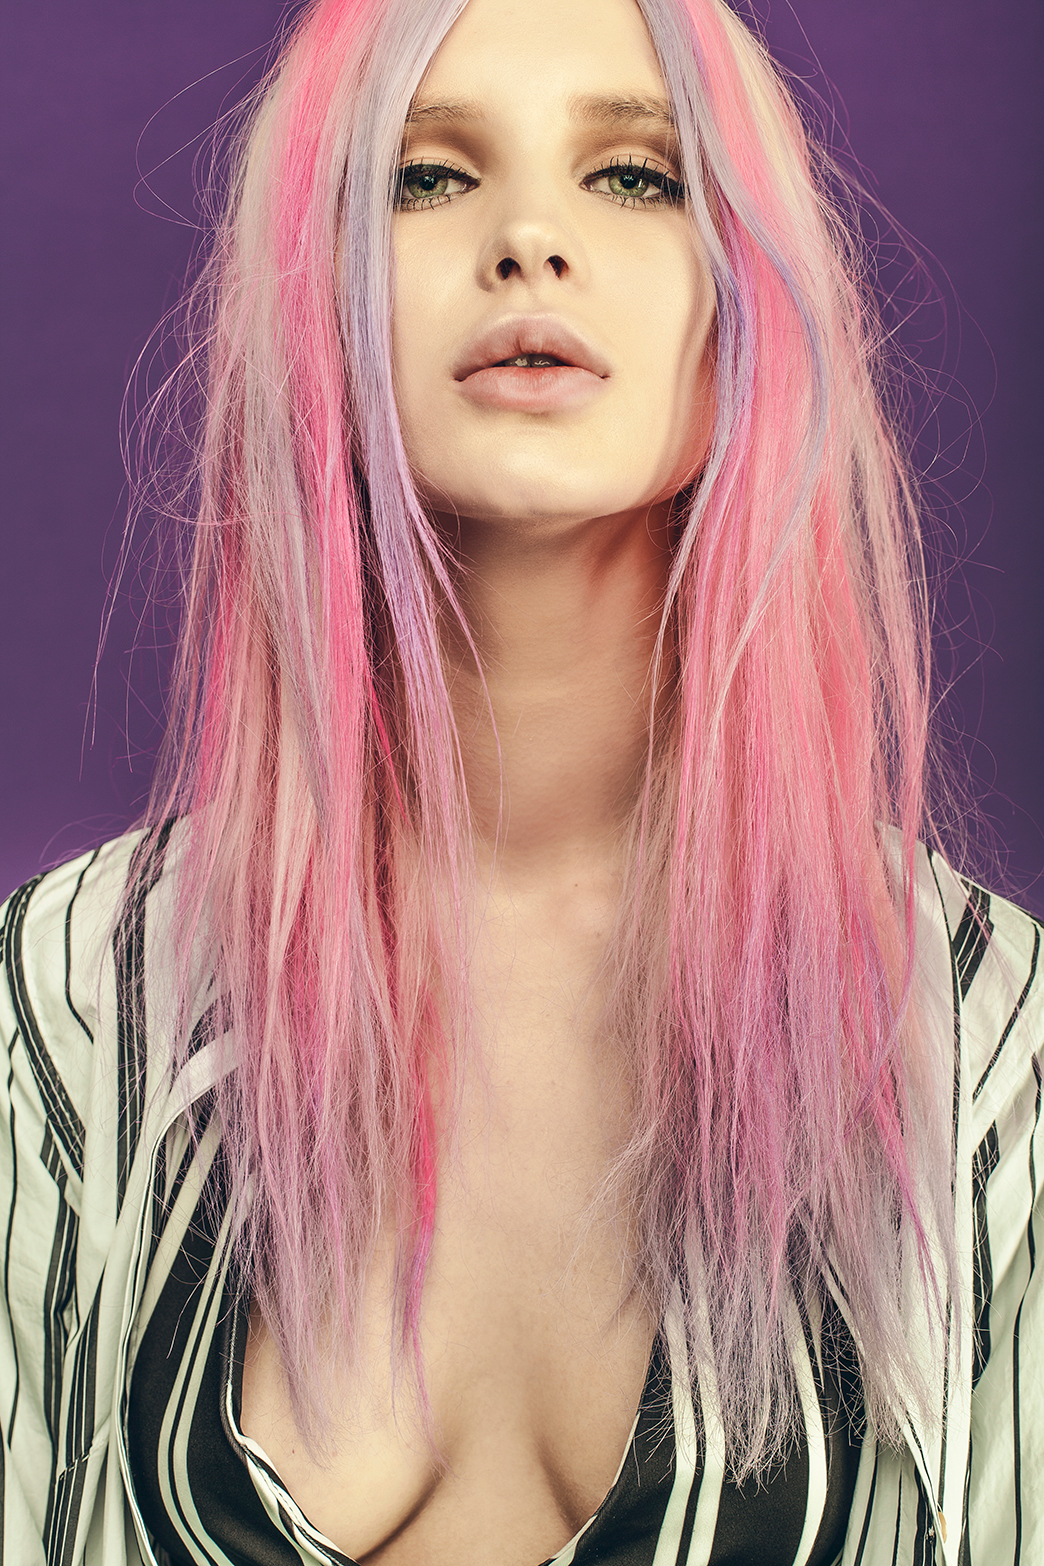 fasioneditorial Fashionphotographer haircolor pink colorblock styled model makeup makeupartist hairdresser